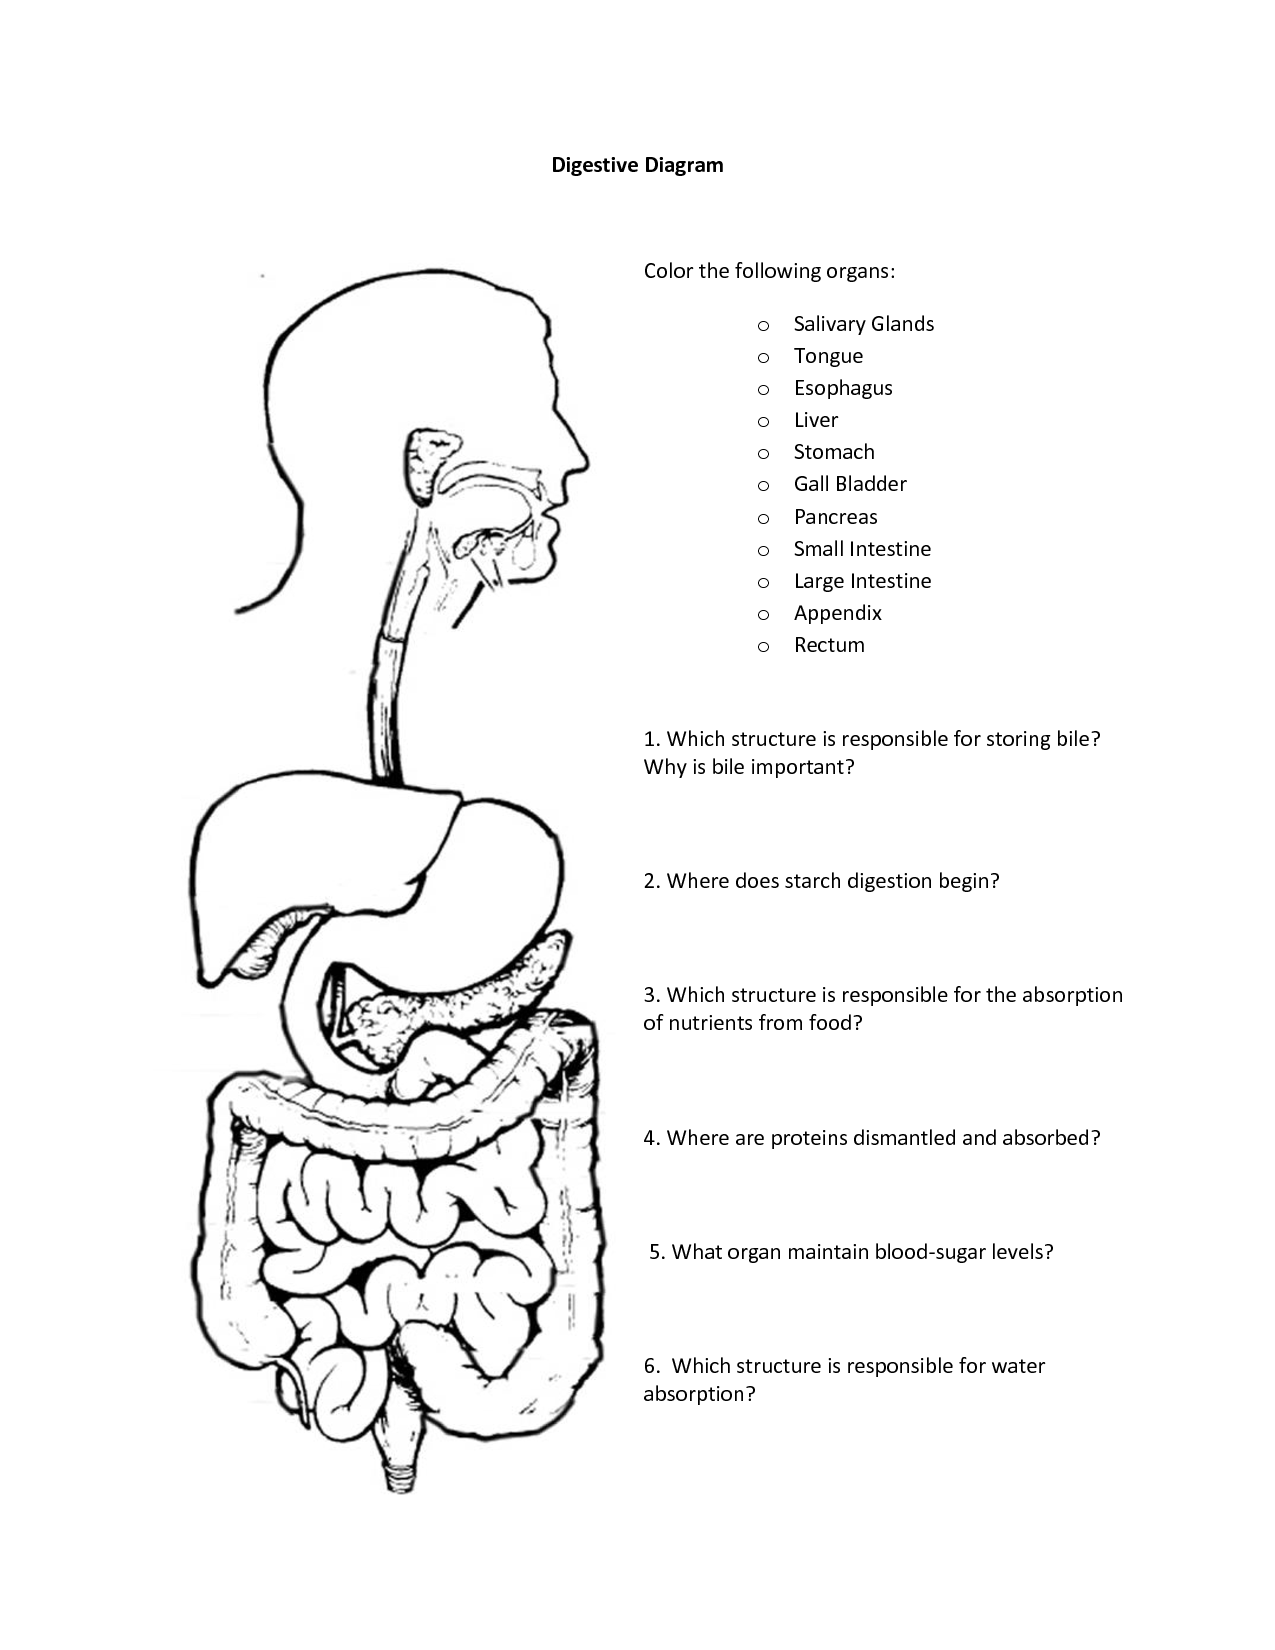 Digestive System Coloring Sheet - Coloring Pages for Kids and for ...